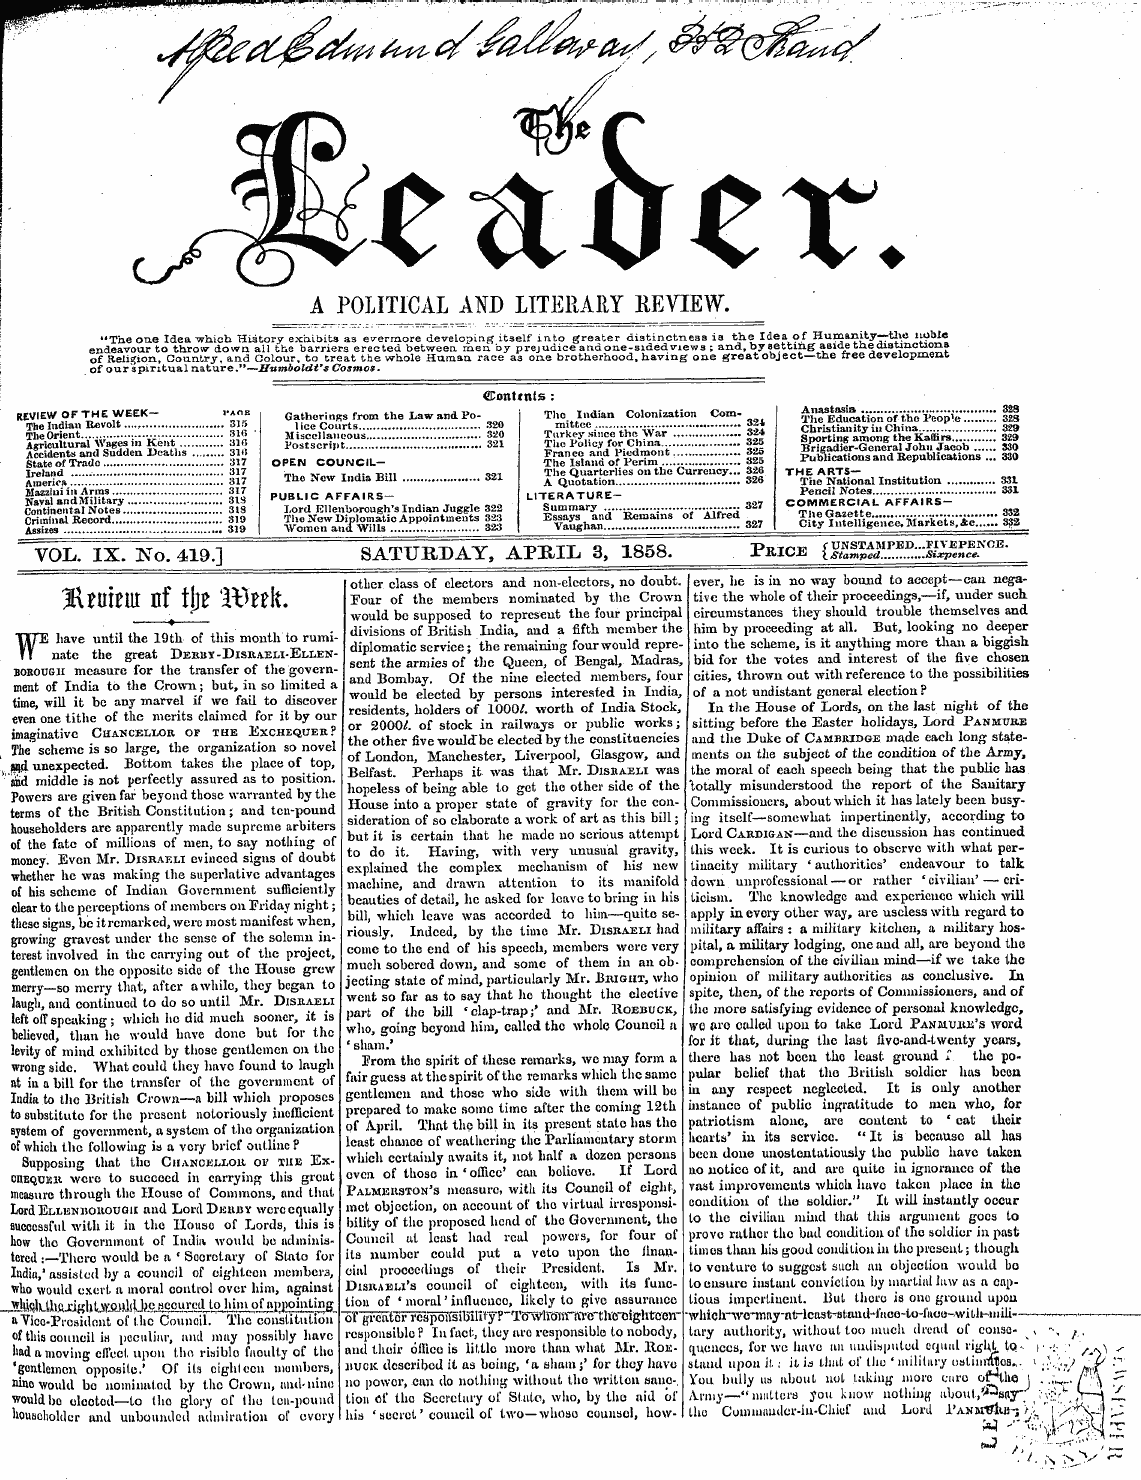 Leader (1850-1860): jS F Y, 2nd edition - J^A Ea'kt. Political And Literary Review...